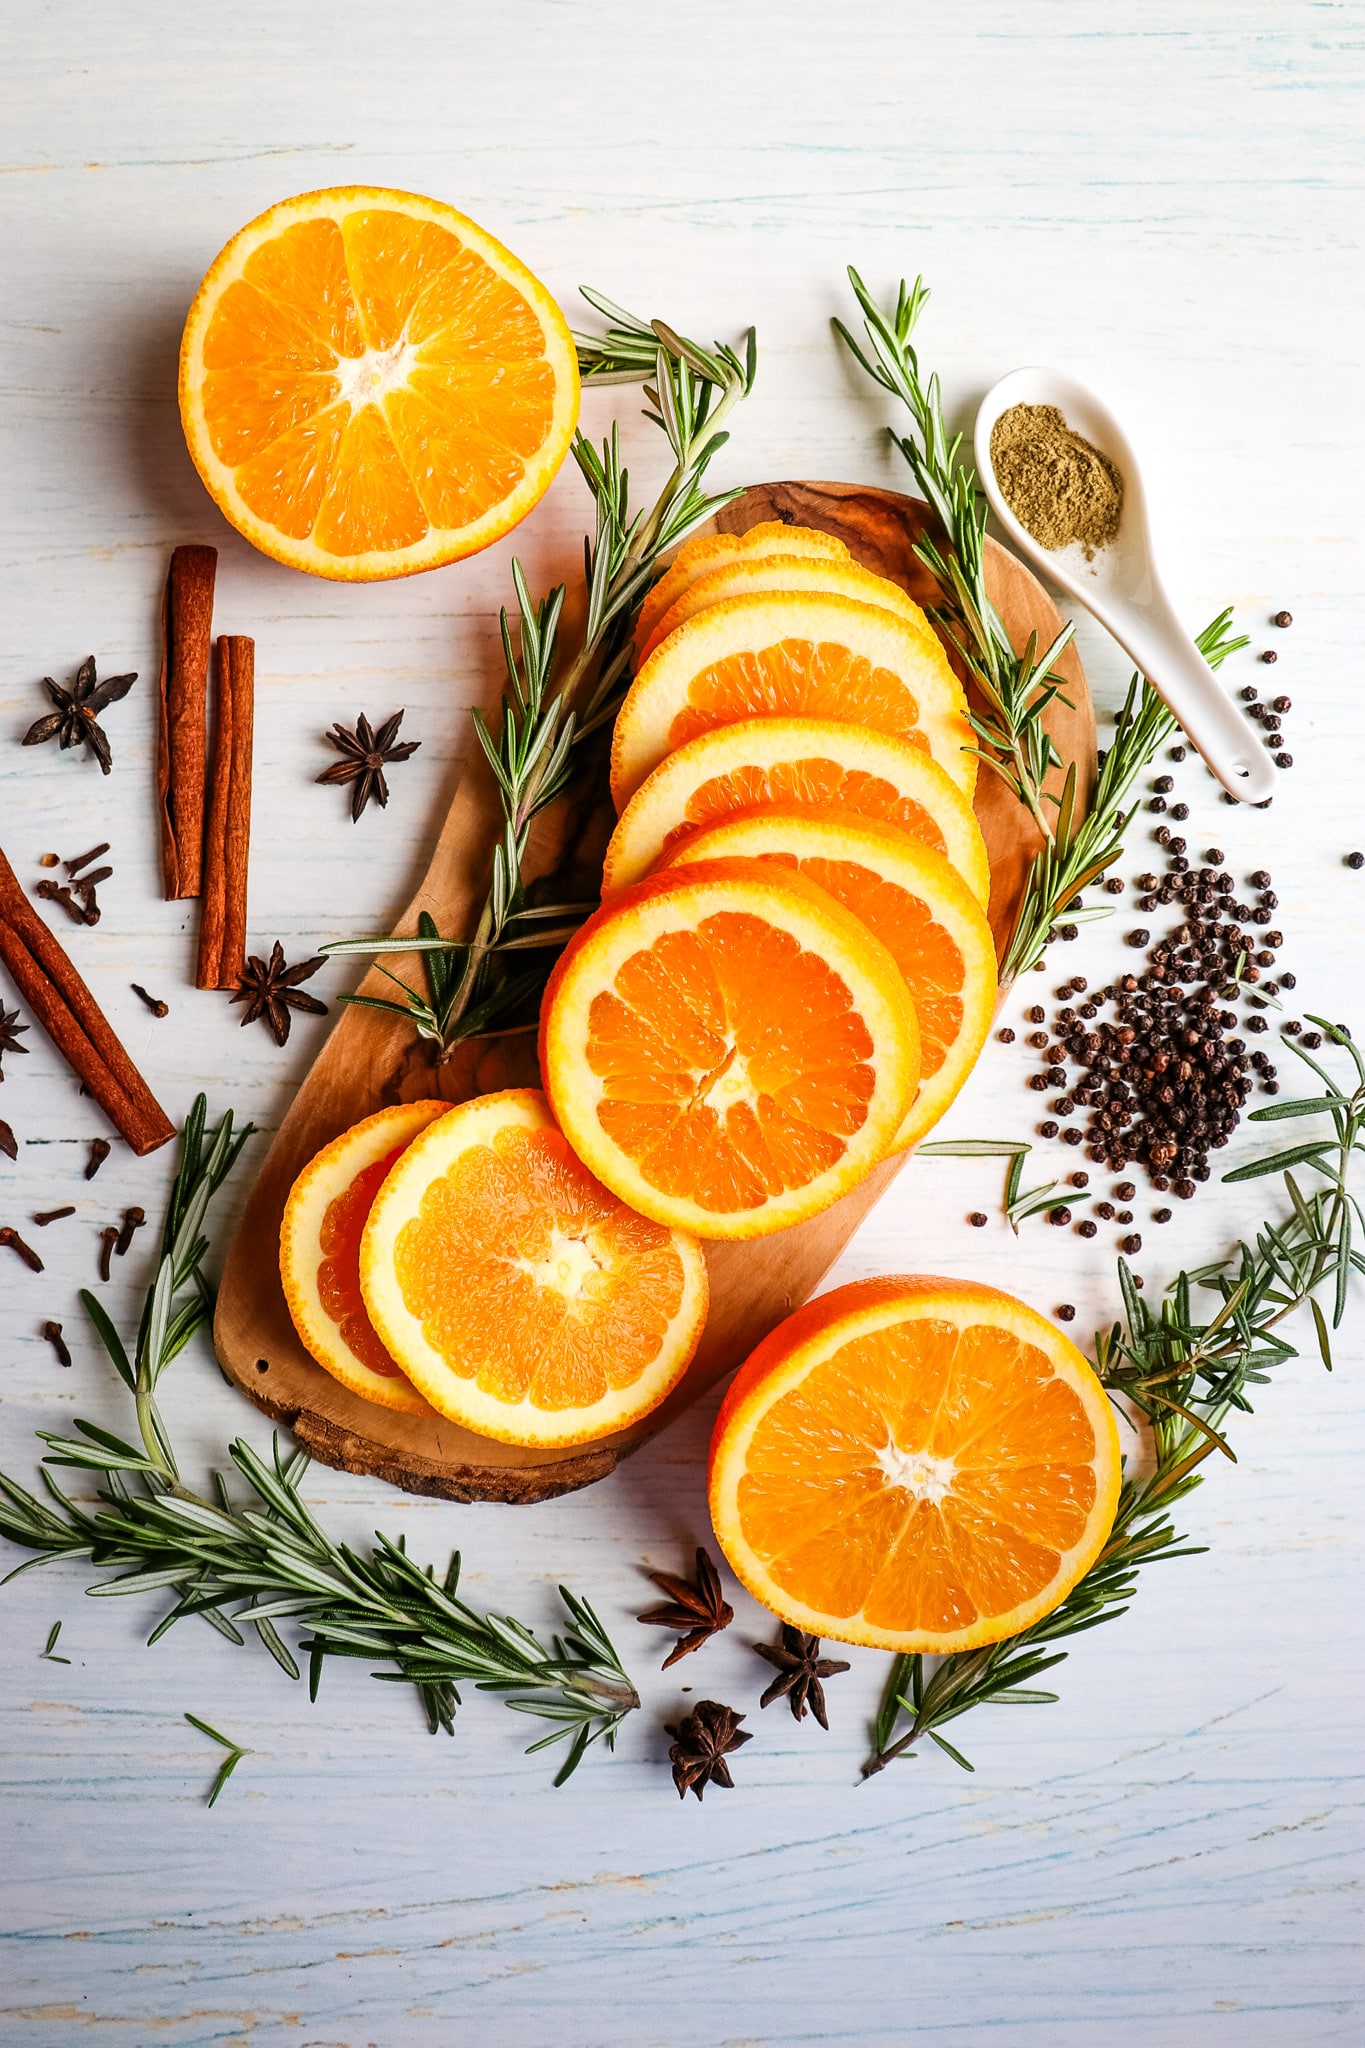 Ingredients needed to make a citrus turkey brine, with sliced oranges in the center and rosemary sprigs on the side.